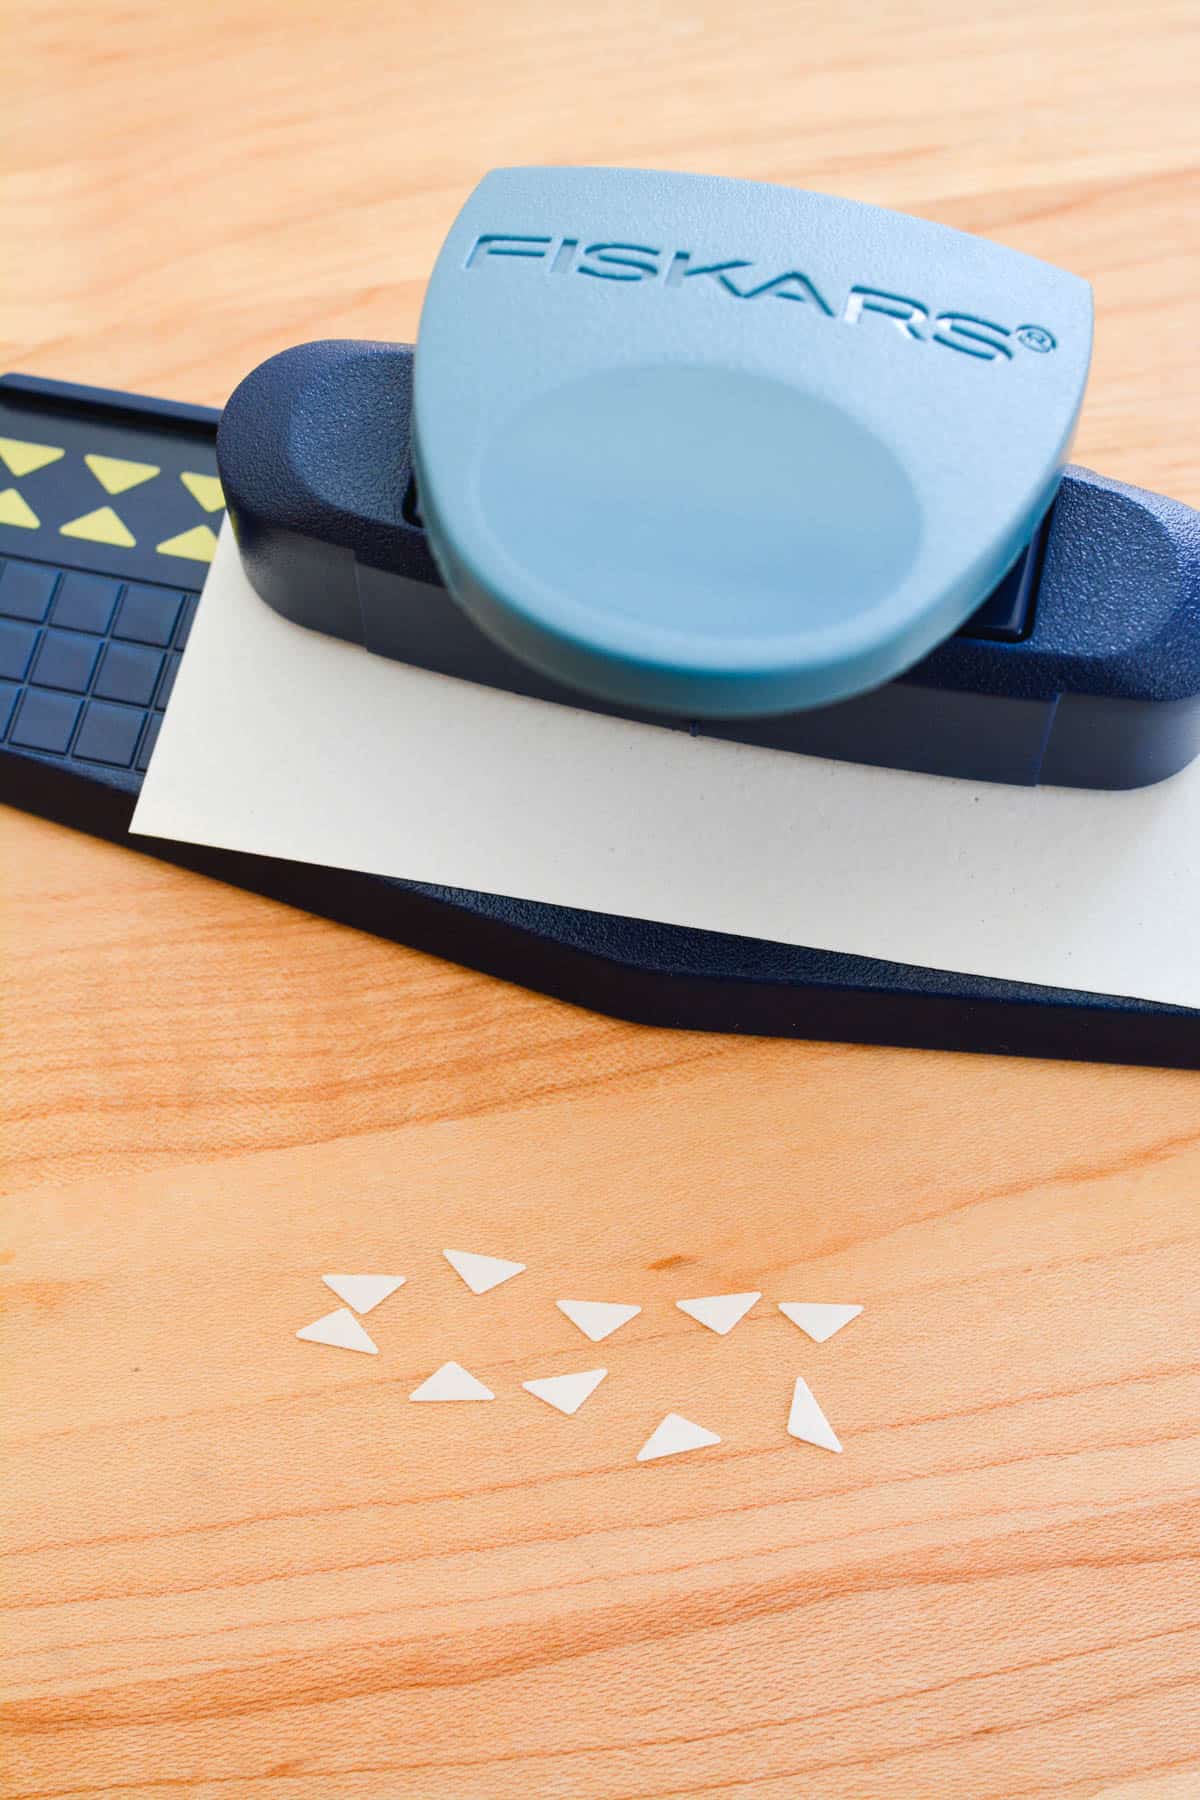 A decorative hole puncher punching triangle shapes